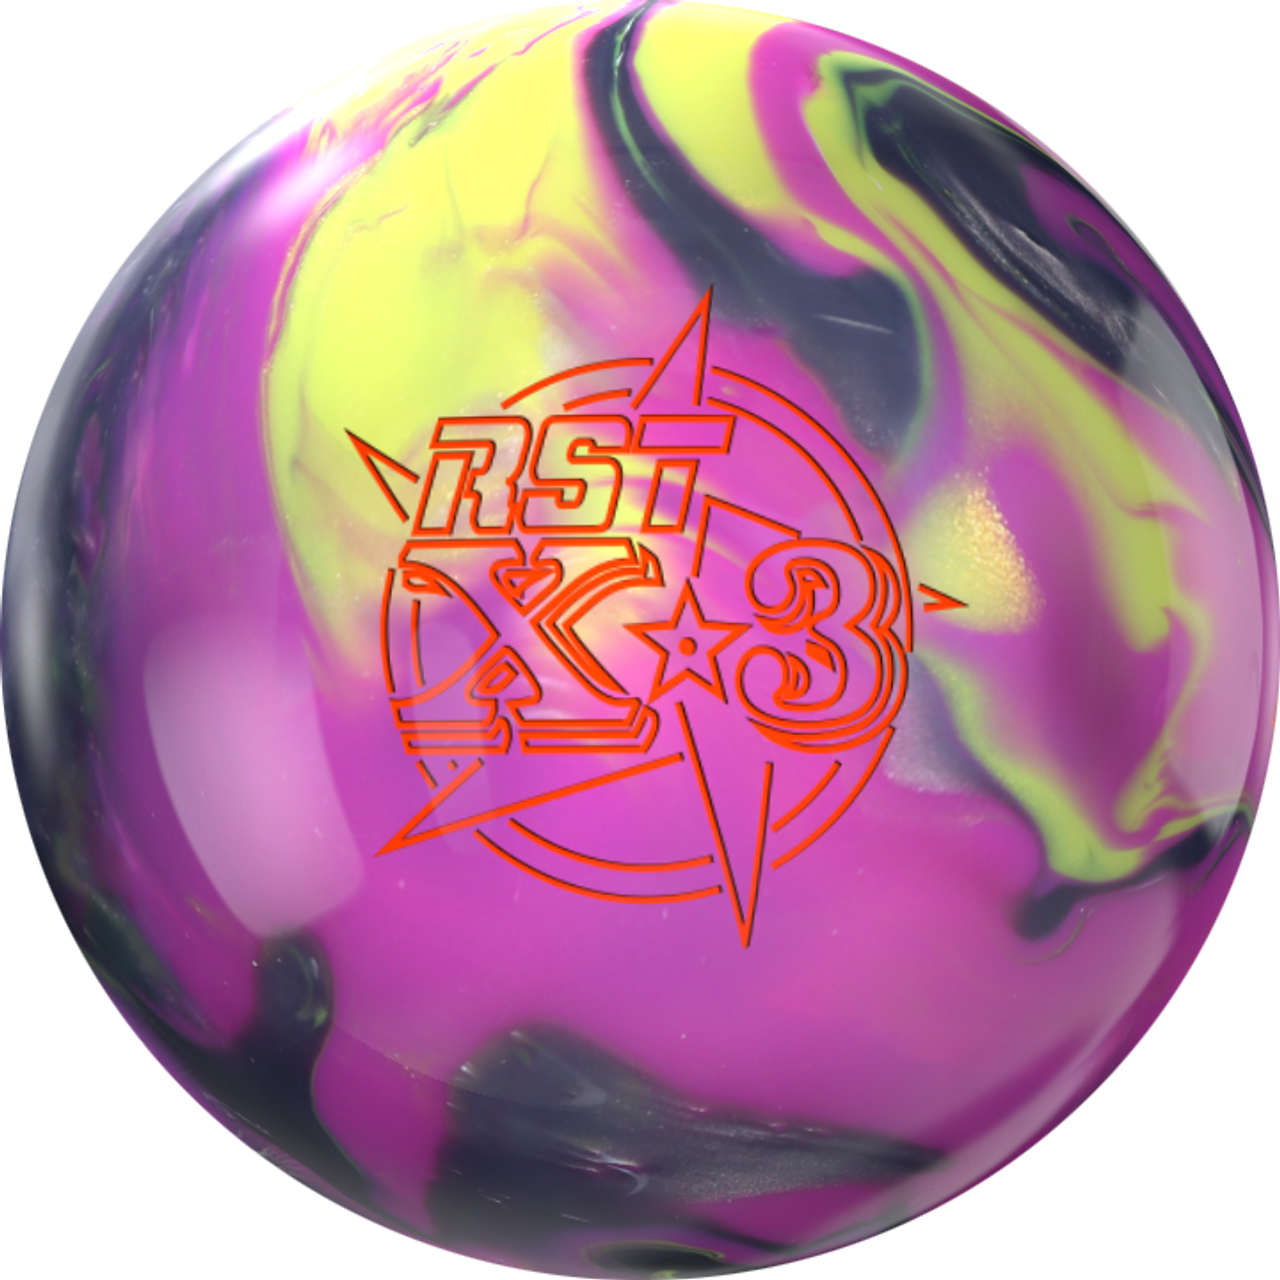 Roto Grip Rst X 3 Bowling Ball Free Shipping | Free Hot Nude Porn Pic ...